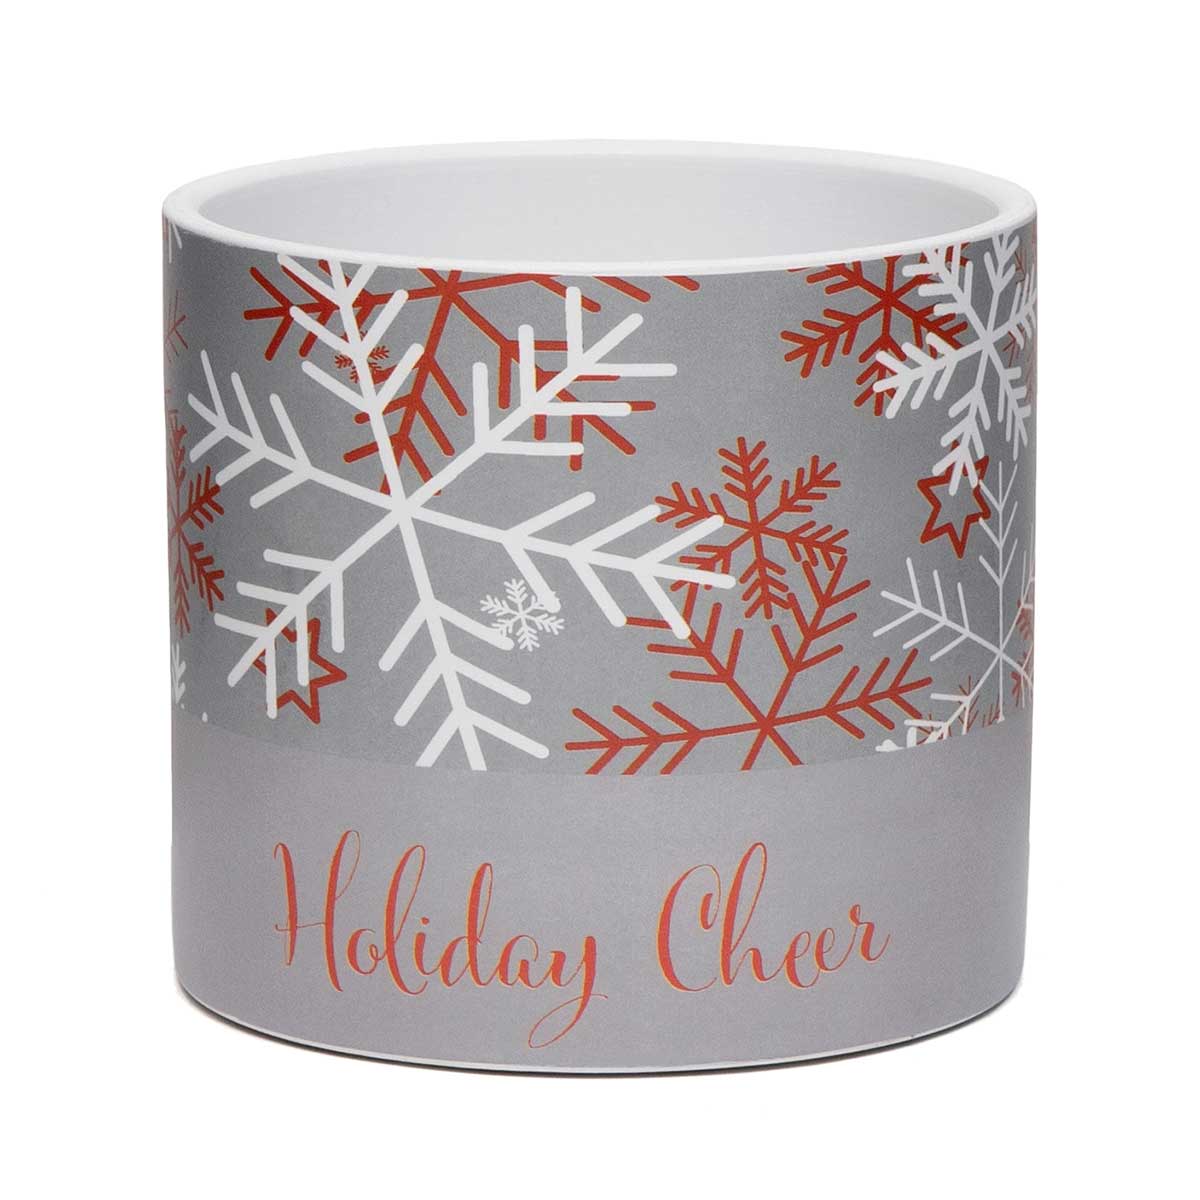 POT HOLIDAY CHEER LARGE 5.25IN X 4.75IN CERAMIC